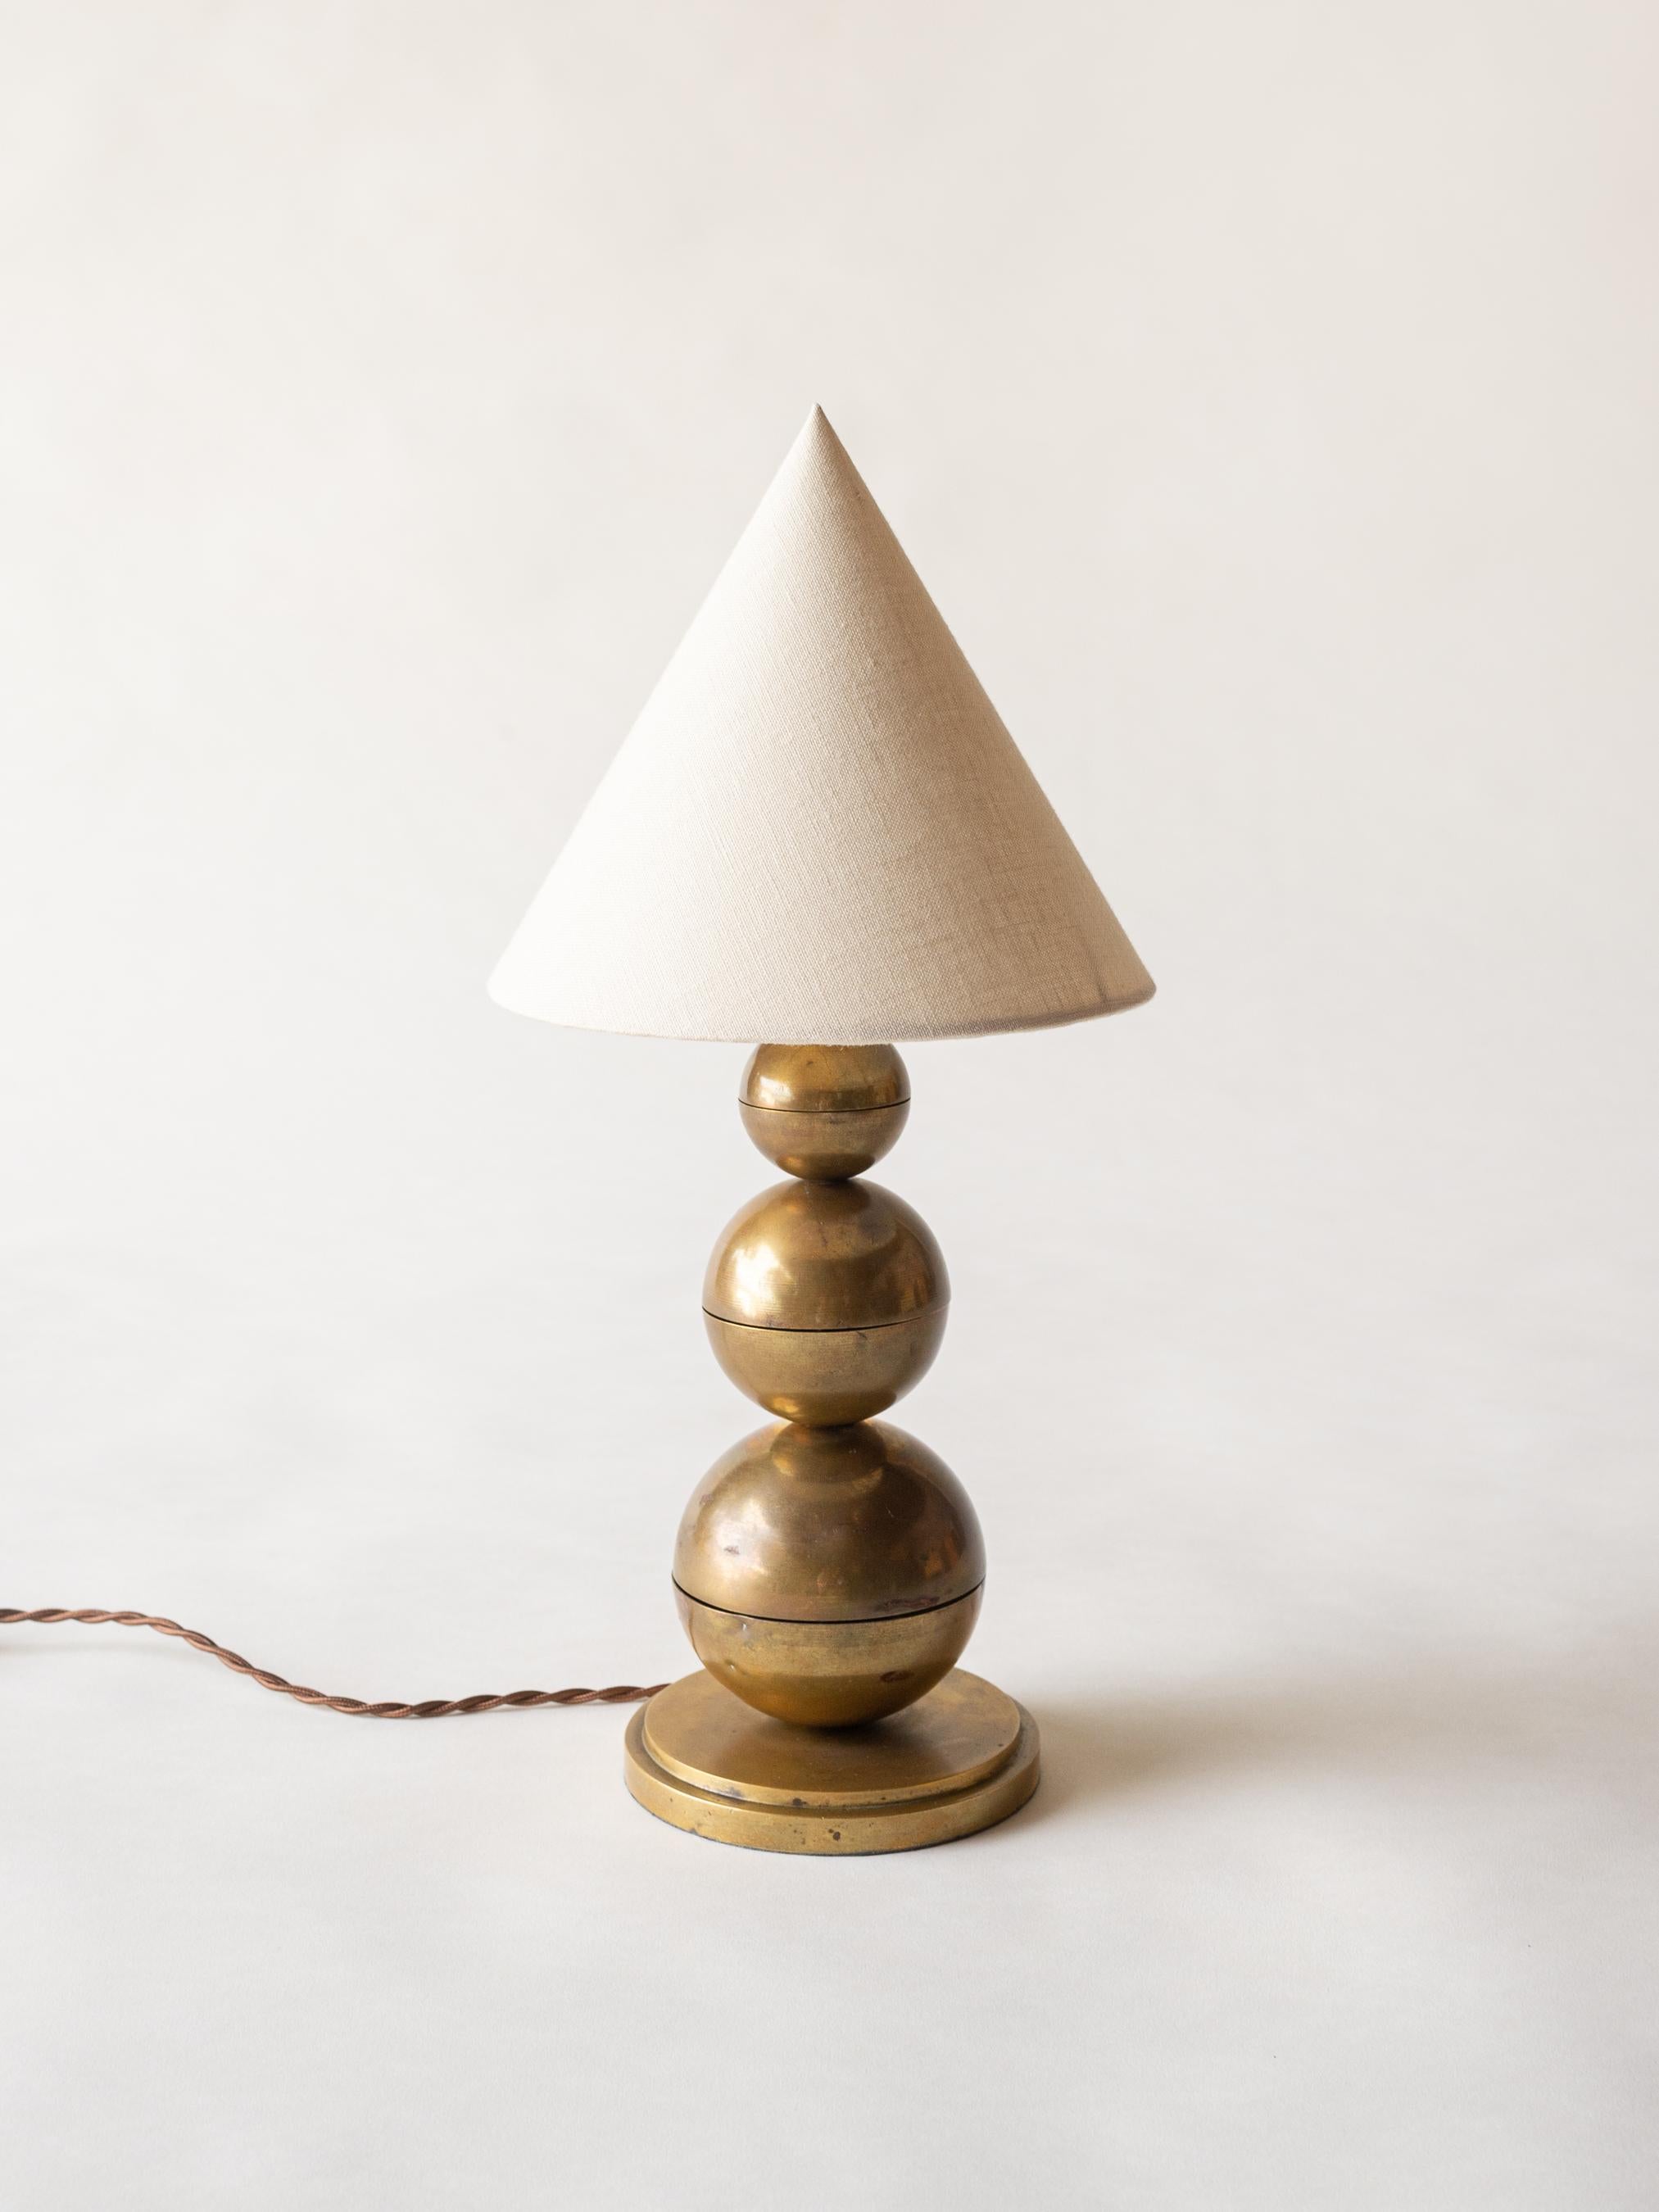 A eye-catching, structural table lamp by Jean Boris Lacroix (1902-1984). The lamp base is structured out of three brass spheres, stacked in graduating size from large to small with rich, original patina. Topped with a custom and period appropriate